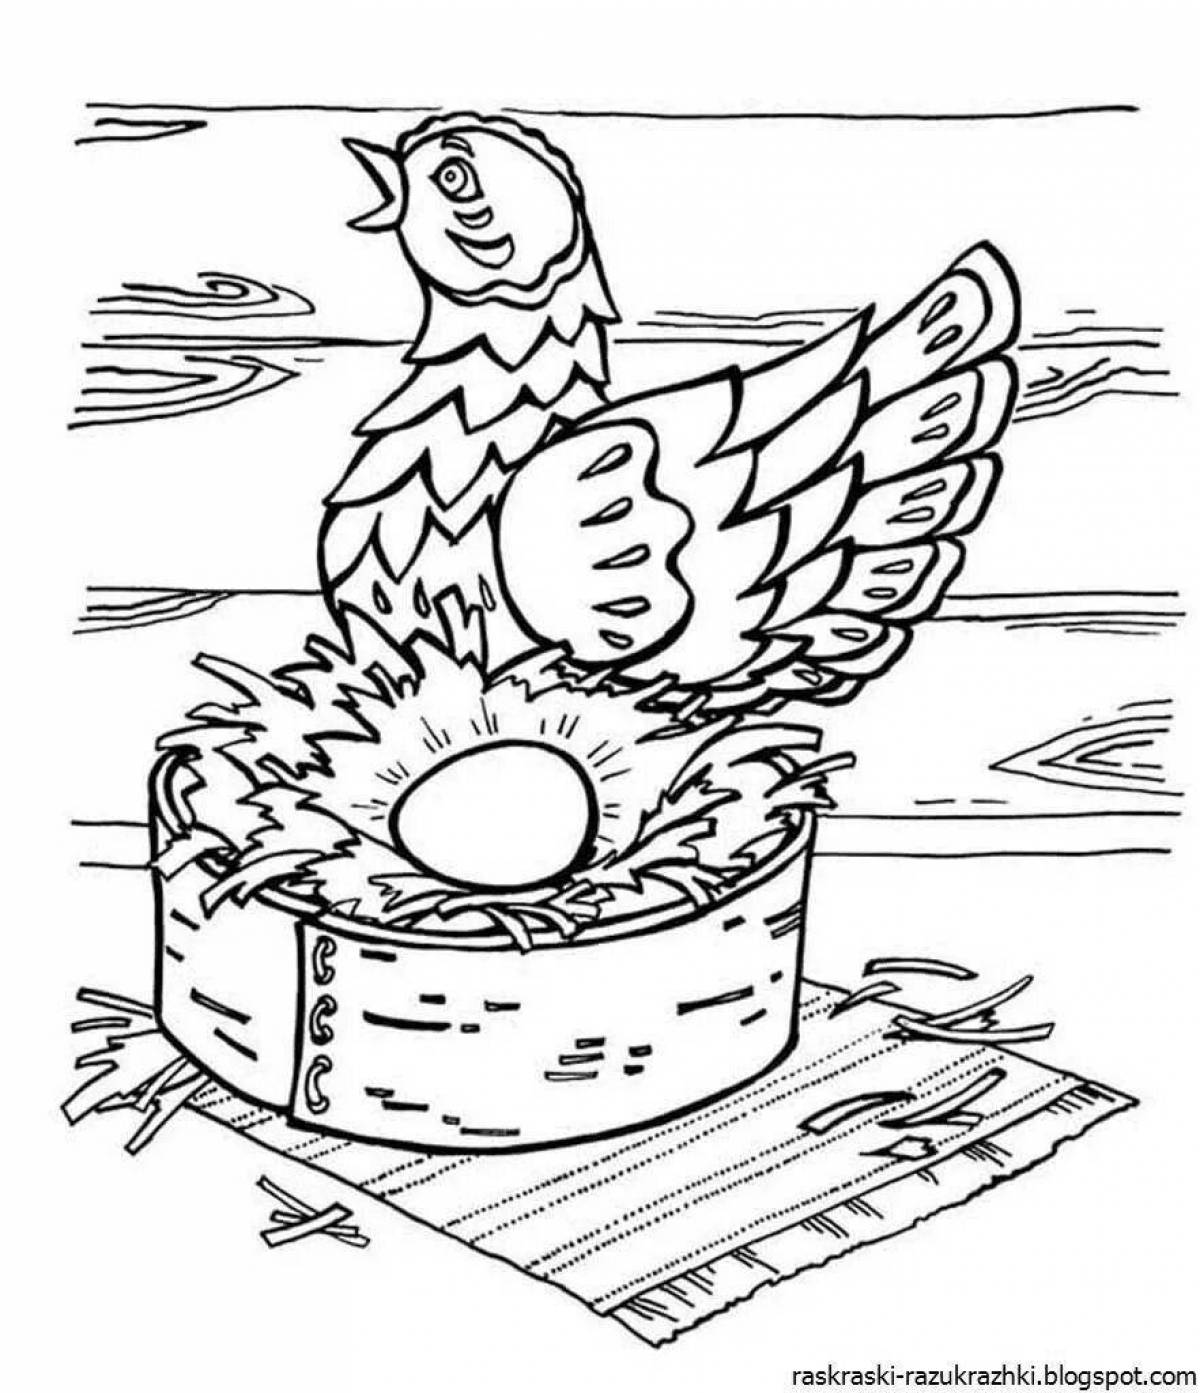 Adorable chick pockmarked coloring book for 3-4 year olds